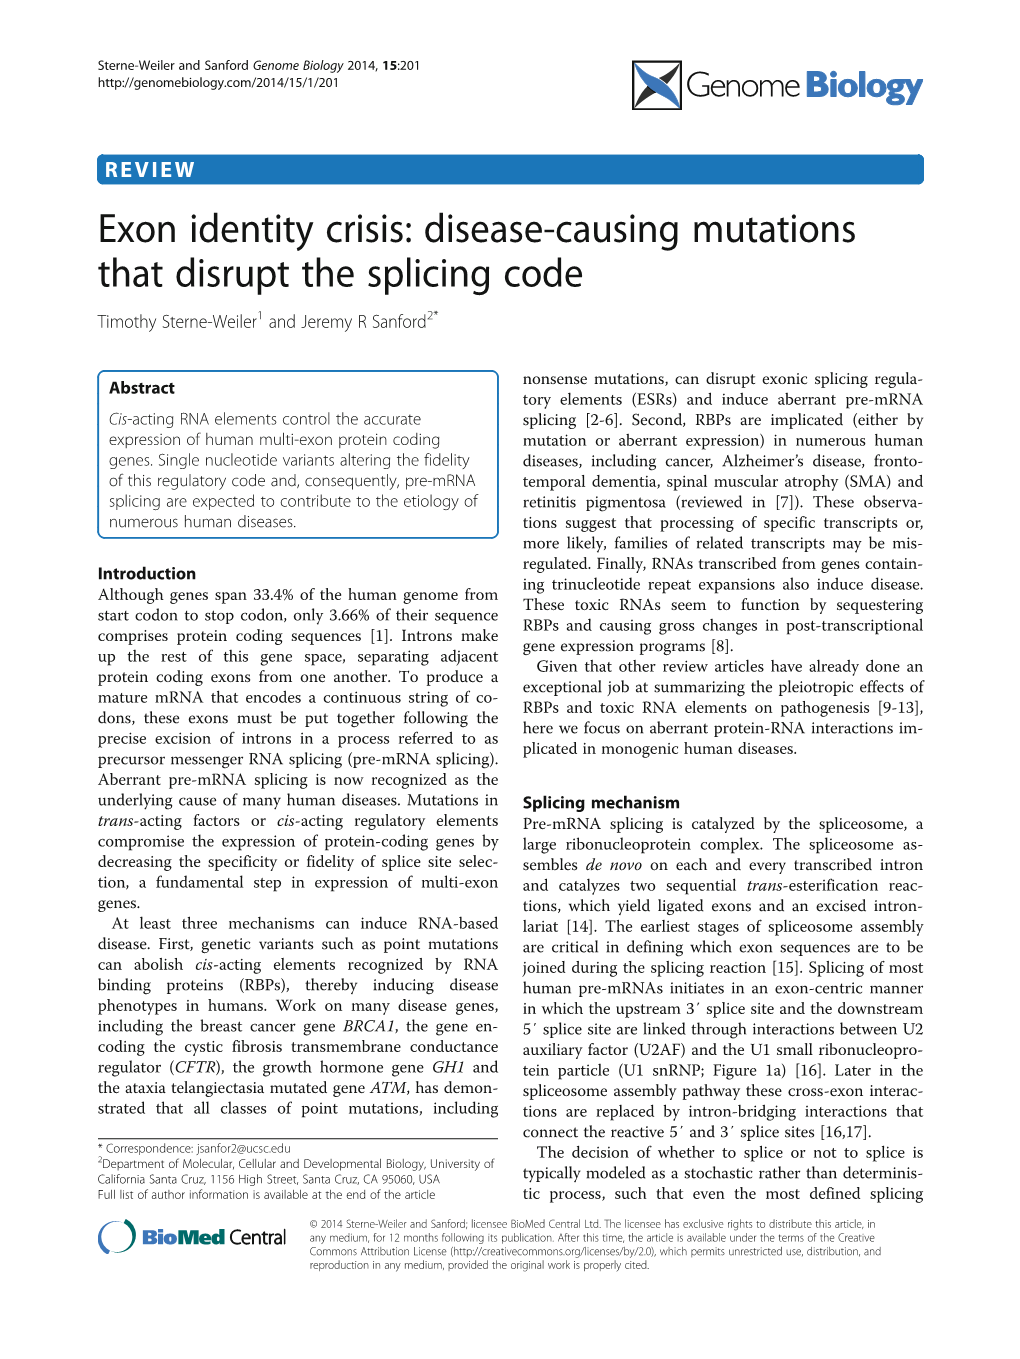 Exon Identity Crisis: Disease-Causing Mutations That Disrupt the Splicing Code Timothy Sterne-Weiler1 and Jeremy R Sanford2*